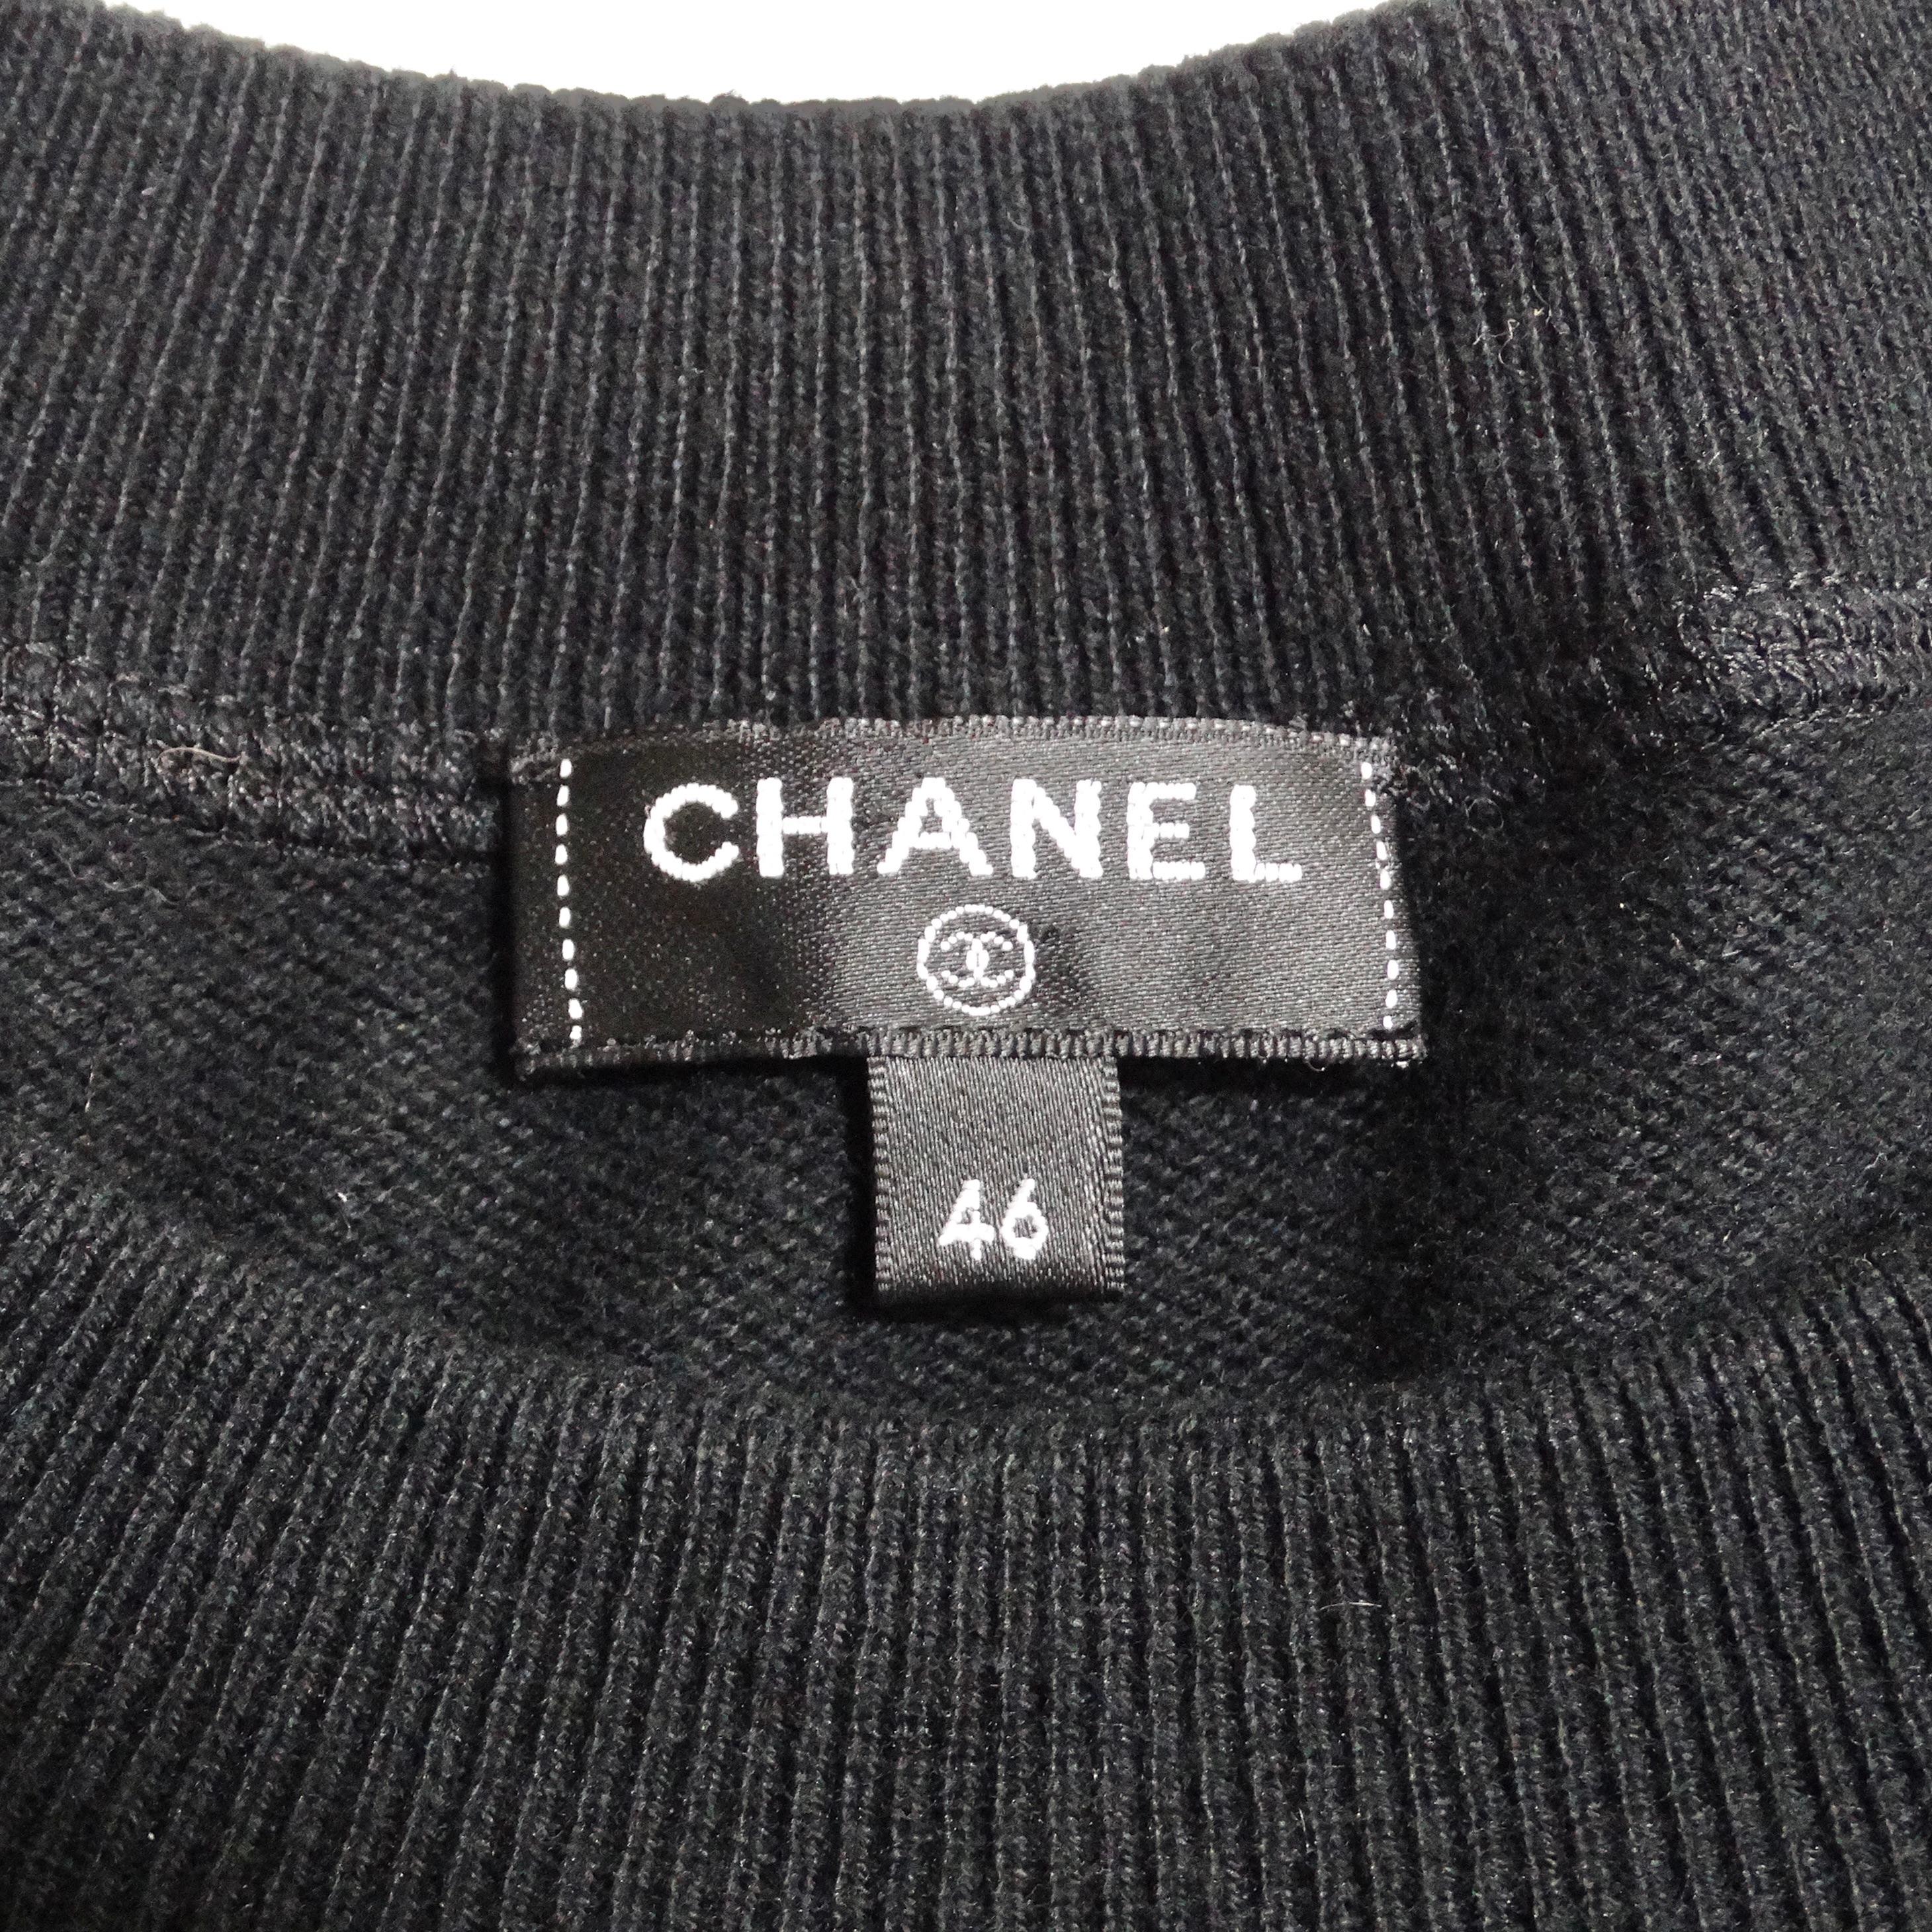 Chanel Black Perforated Knit Short Sleeve Dress For Sale 4